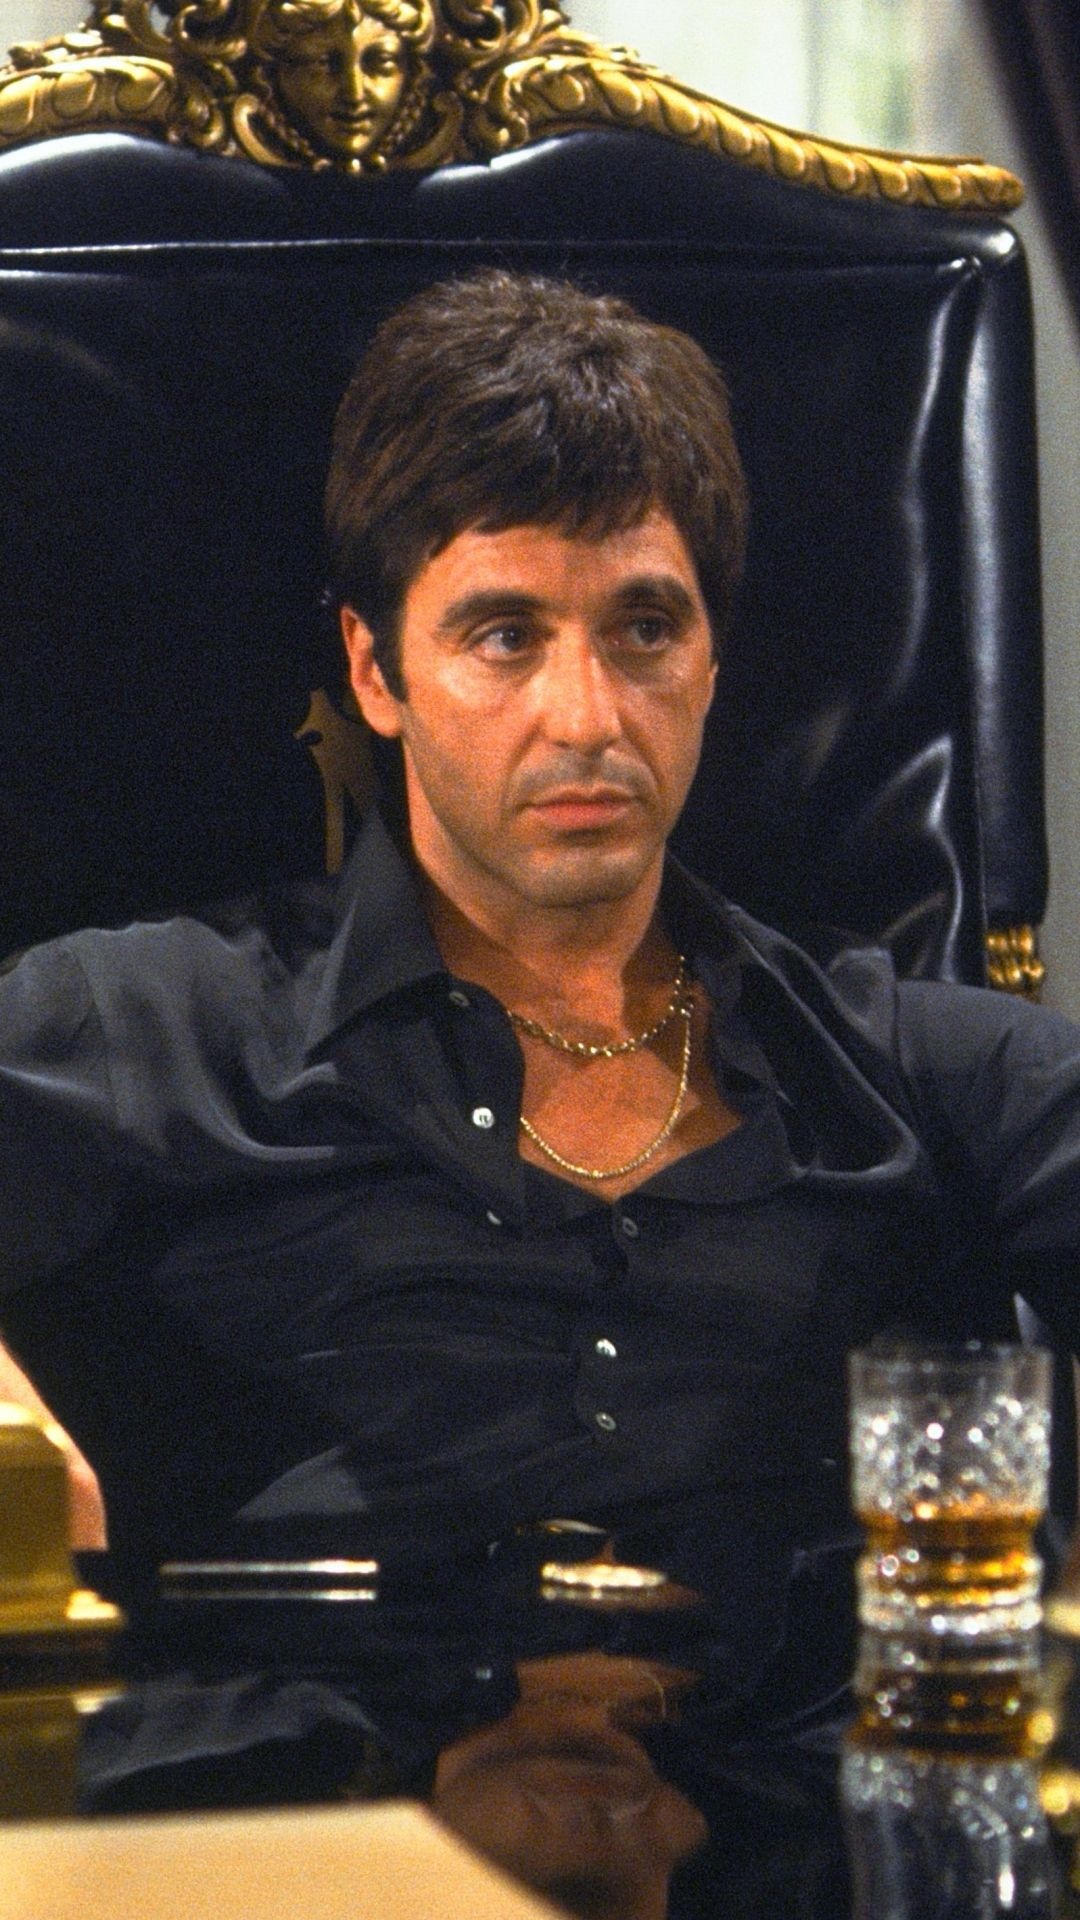 HD wallpaper, Samsung 1080P Scarface Background Photo, Symbolic Imagery, Palm Tree Backdrop, Scarface Movie, 1080X1920 Full Hd Phone